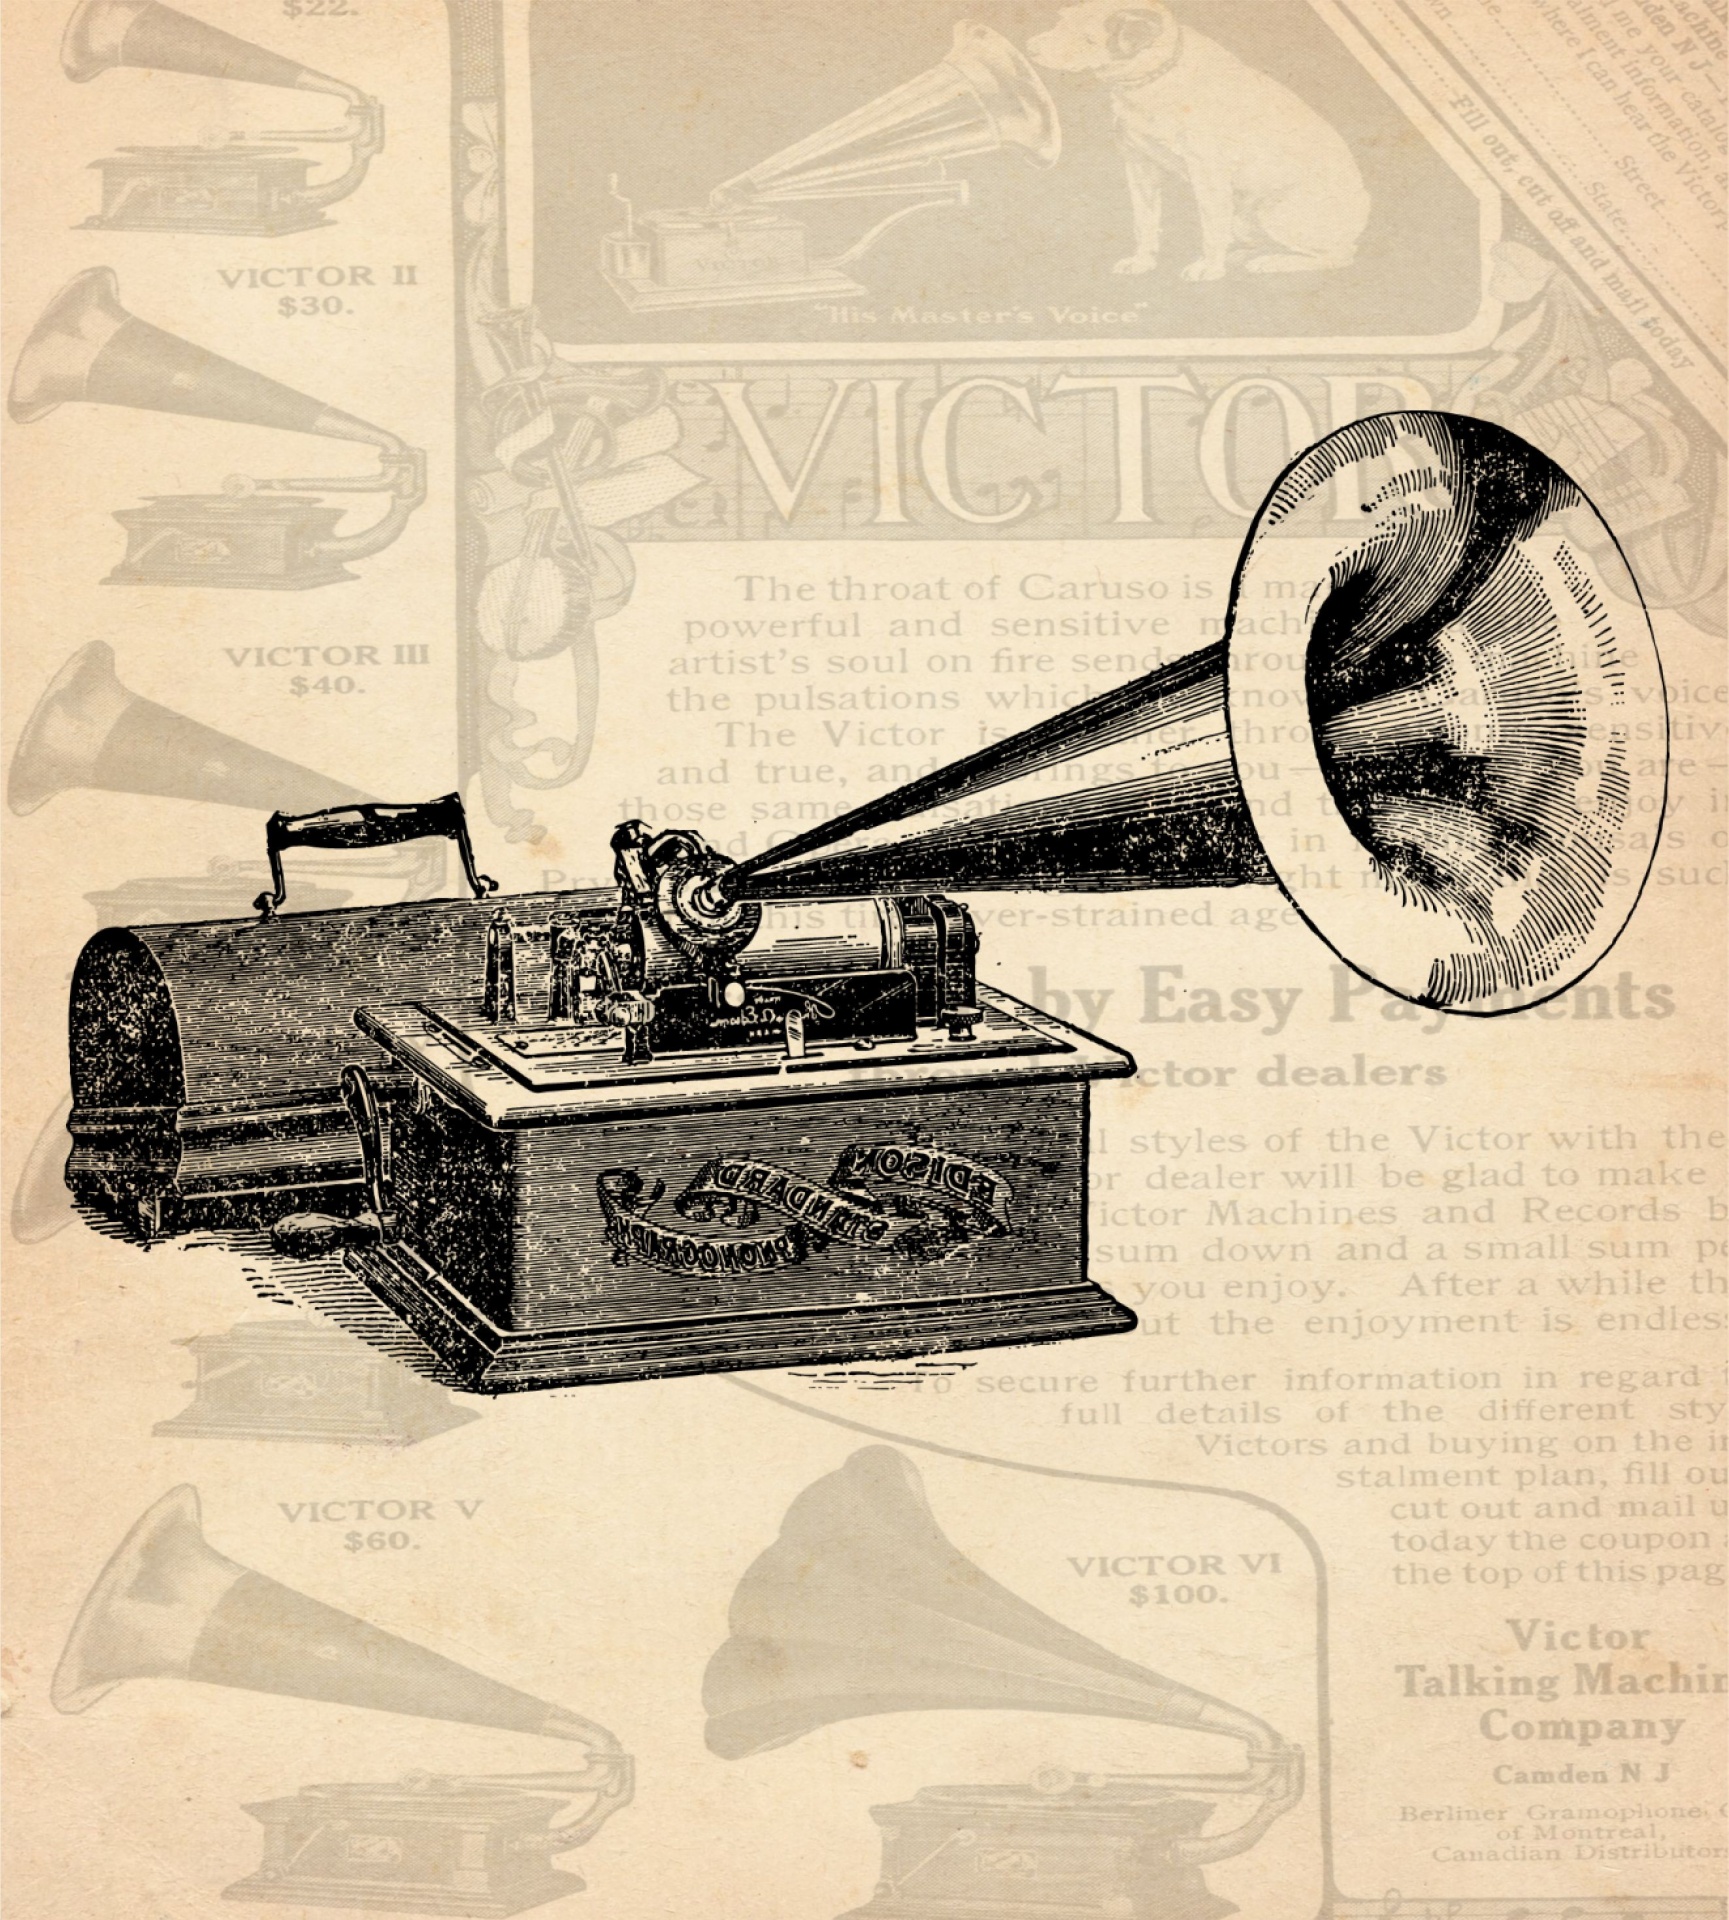 image of antique gramophone on newsprint background